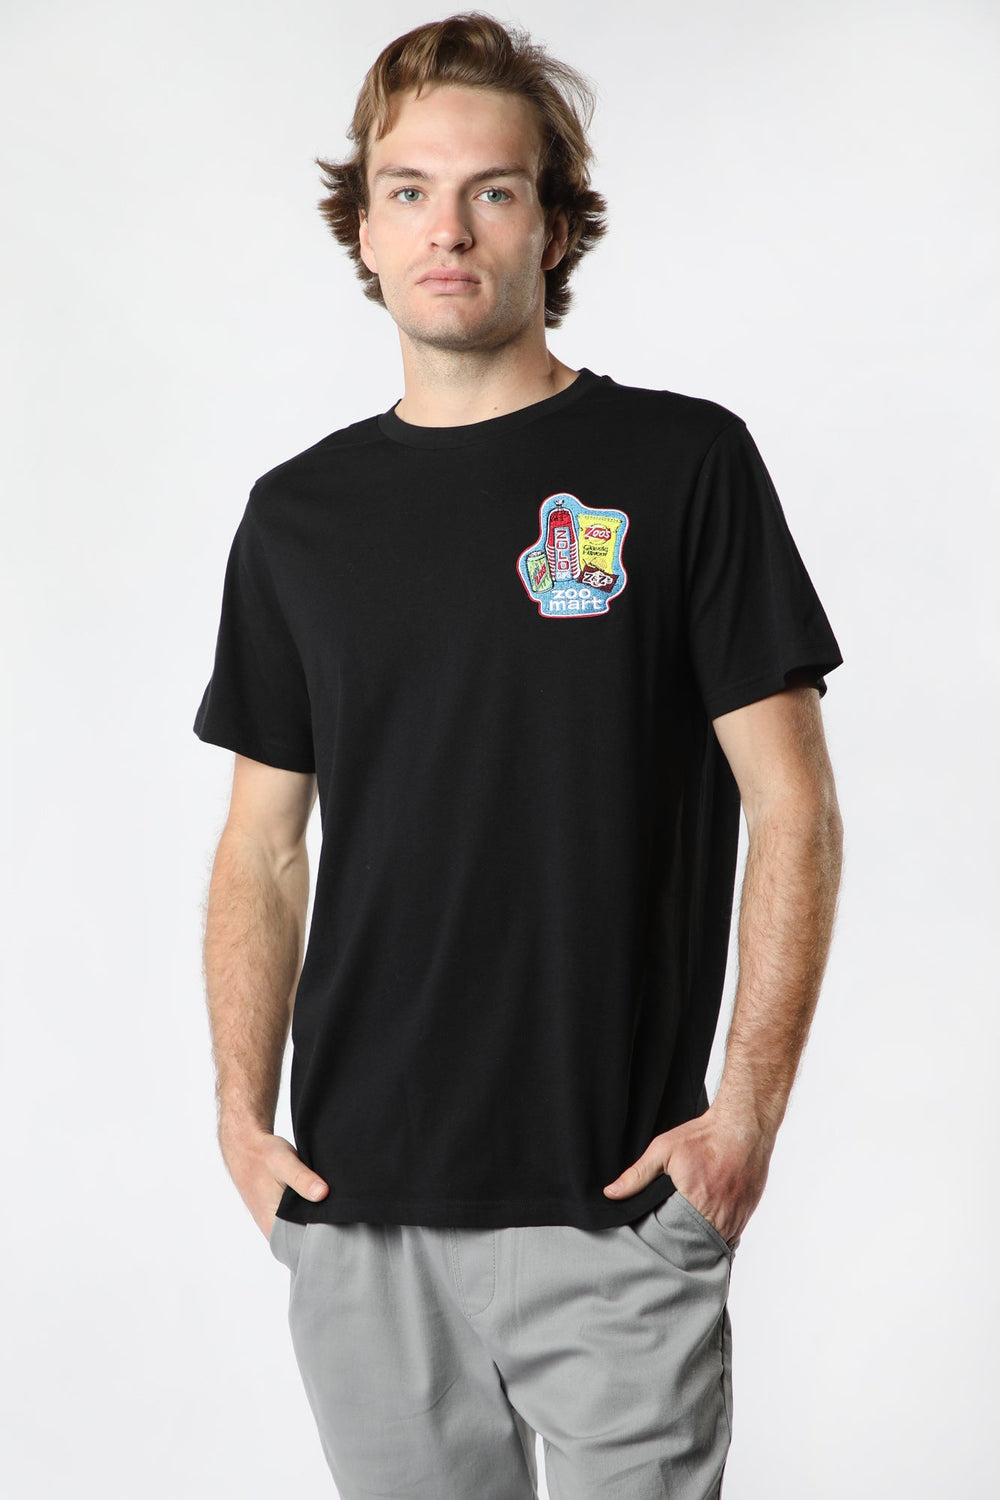 T-Shirt Patch Zoomart Zoo York Homme Noir